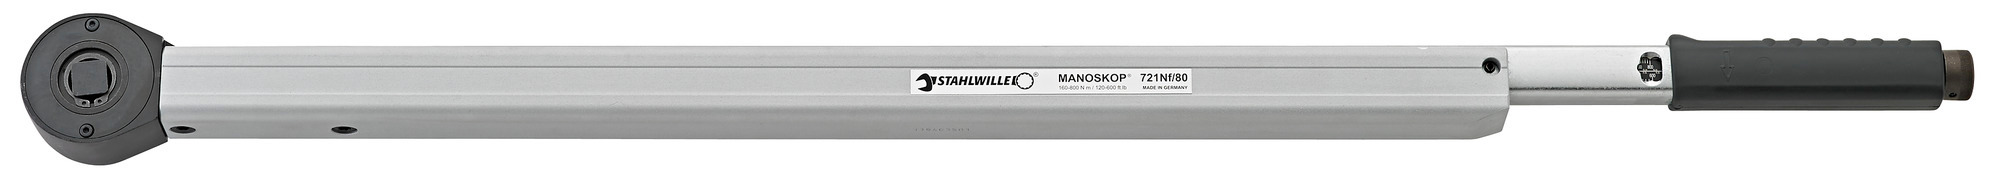 Standard MANOSKOP® Torque Wrenches with Permanently Installed Ratchet 721Nf